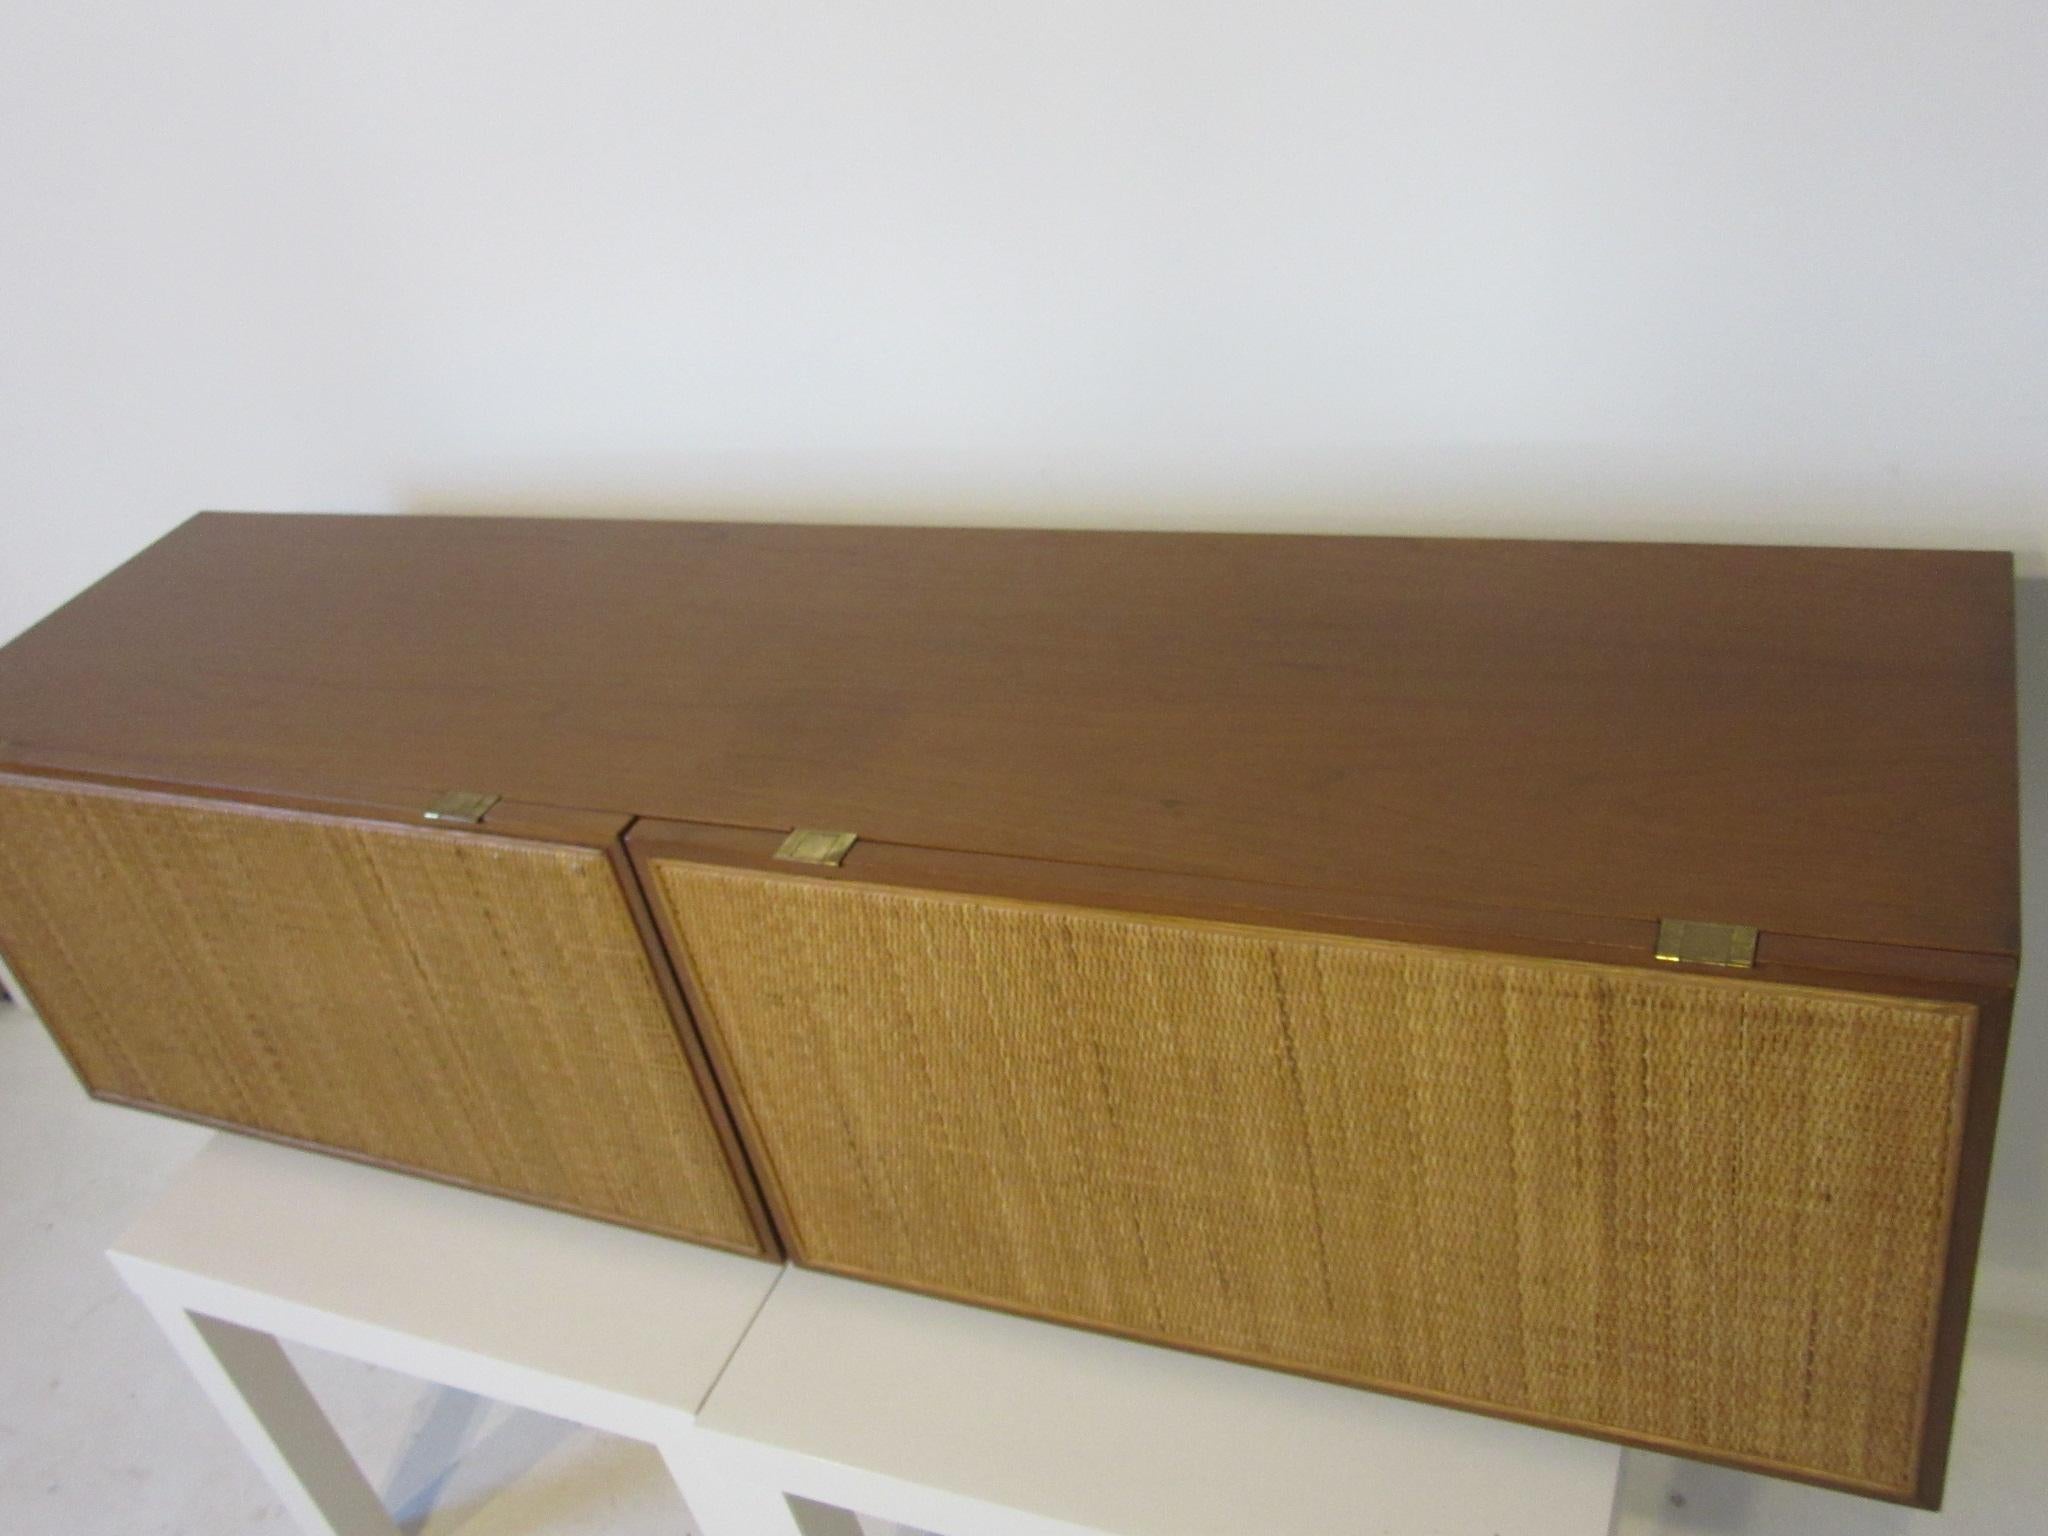 North American Hanging Walnut Cabinet by George Nelson for Herman Miller